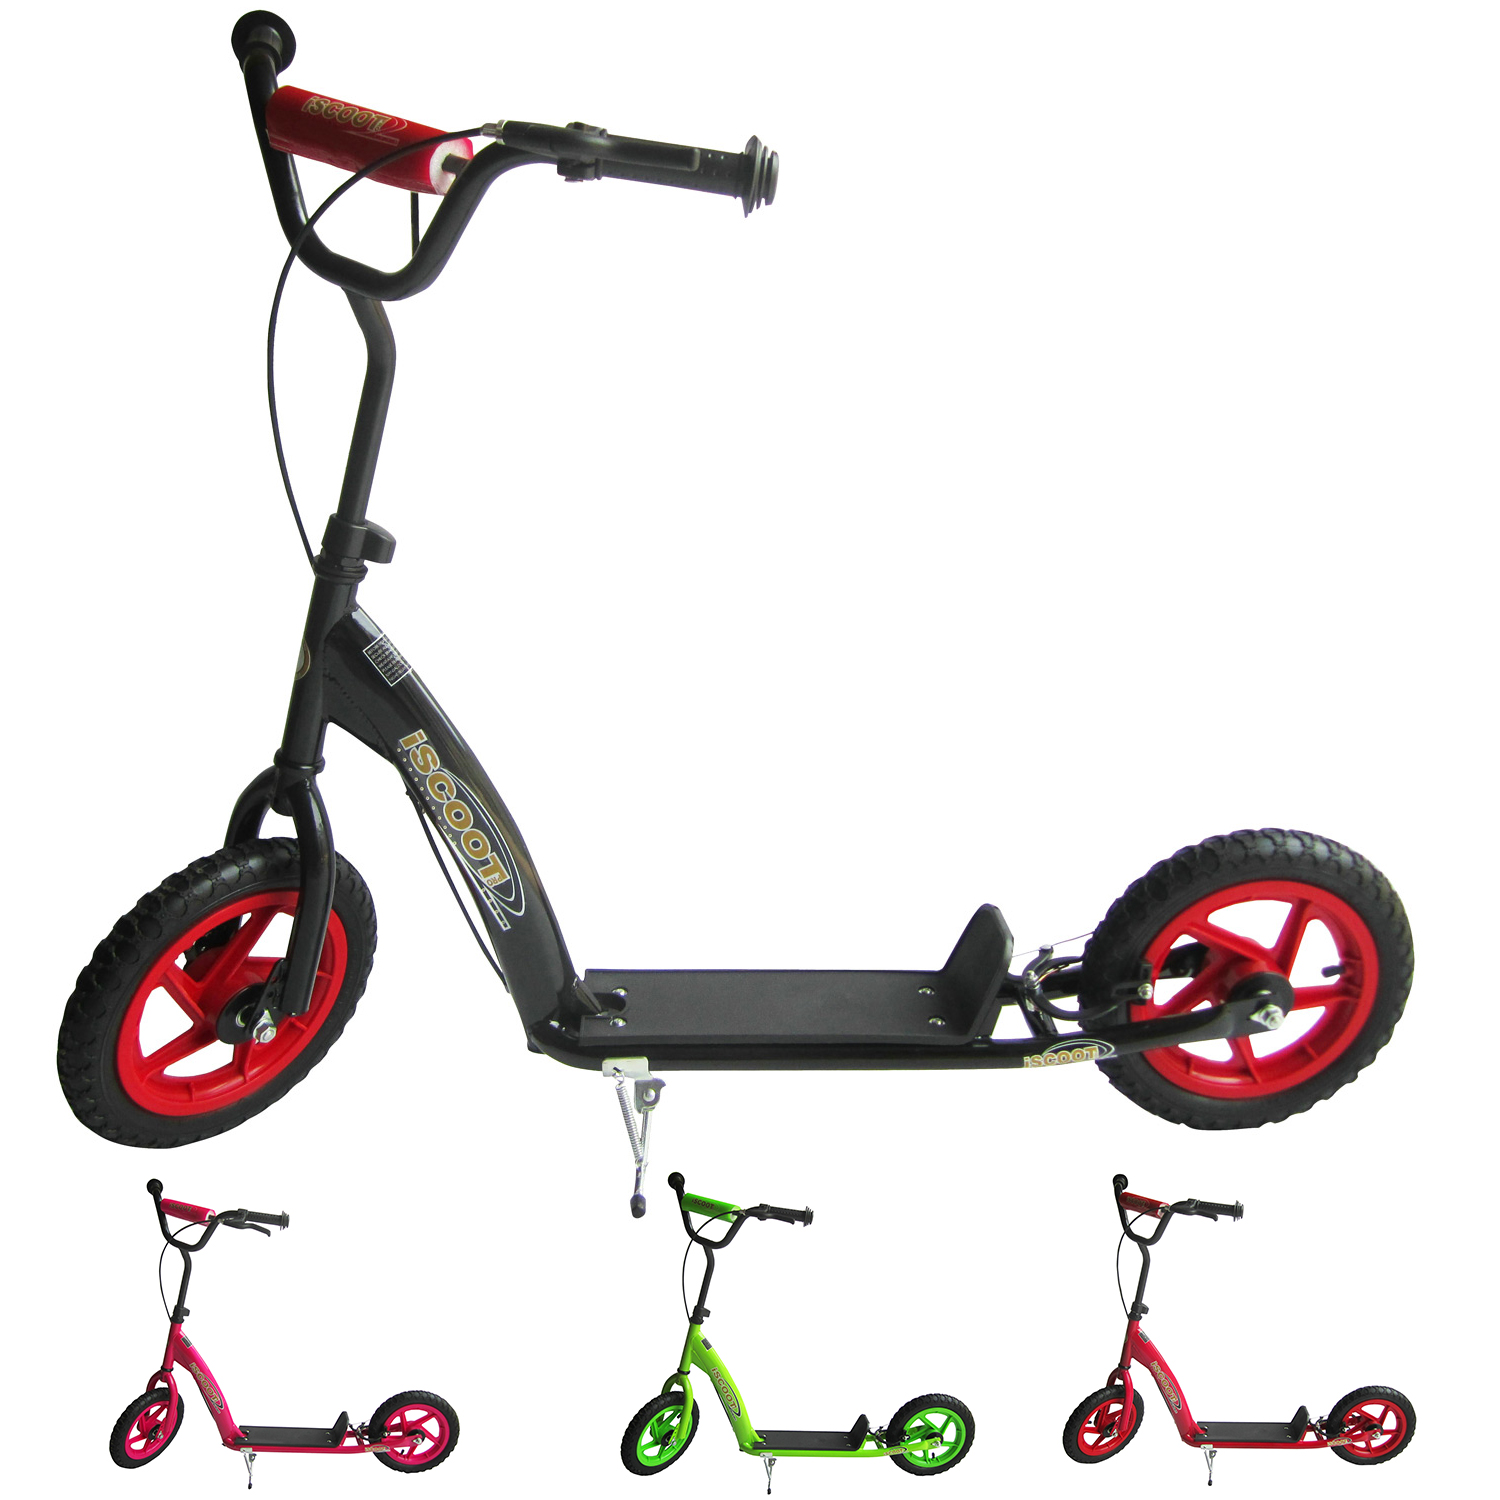 Iscoot Push Stunt Scooter With Jumbo Bmx Wheels Foot Bike Bicycle Cycle